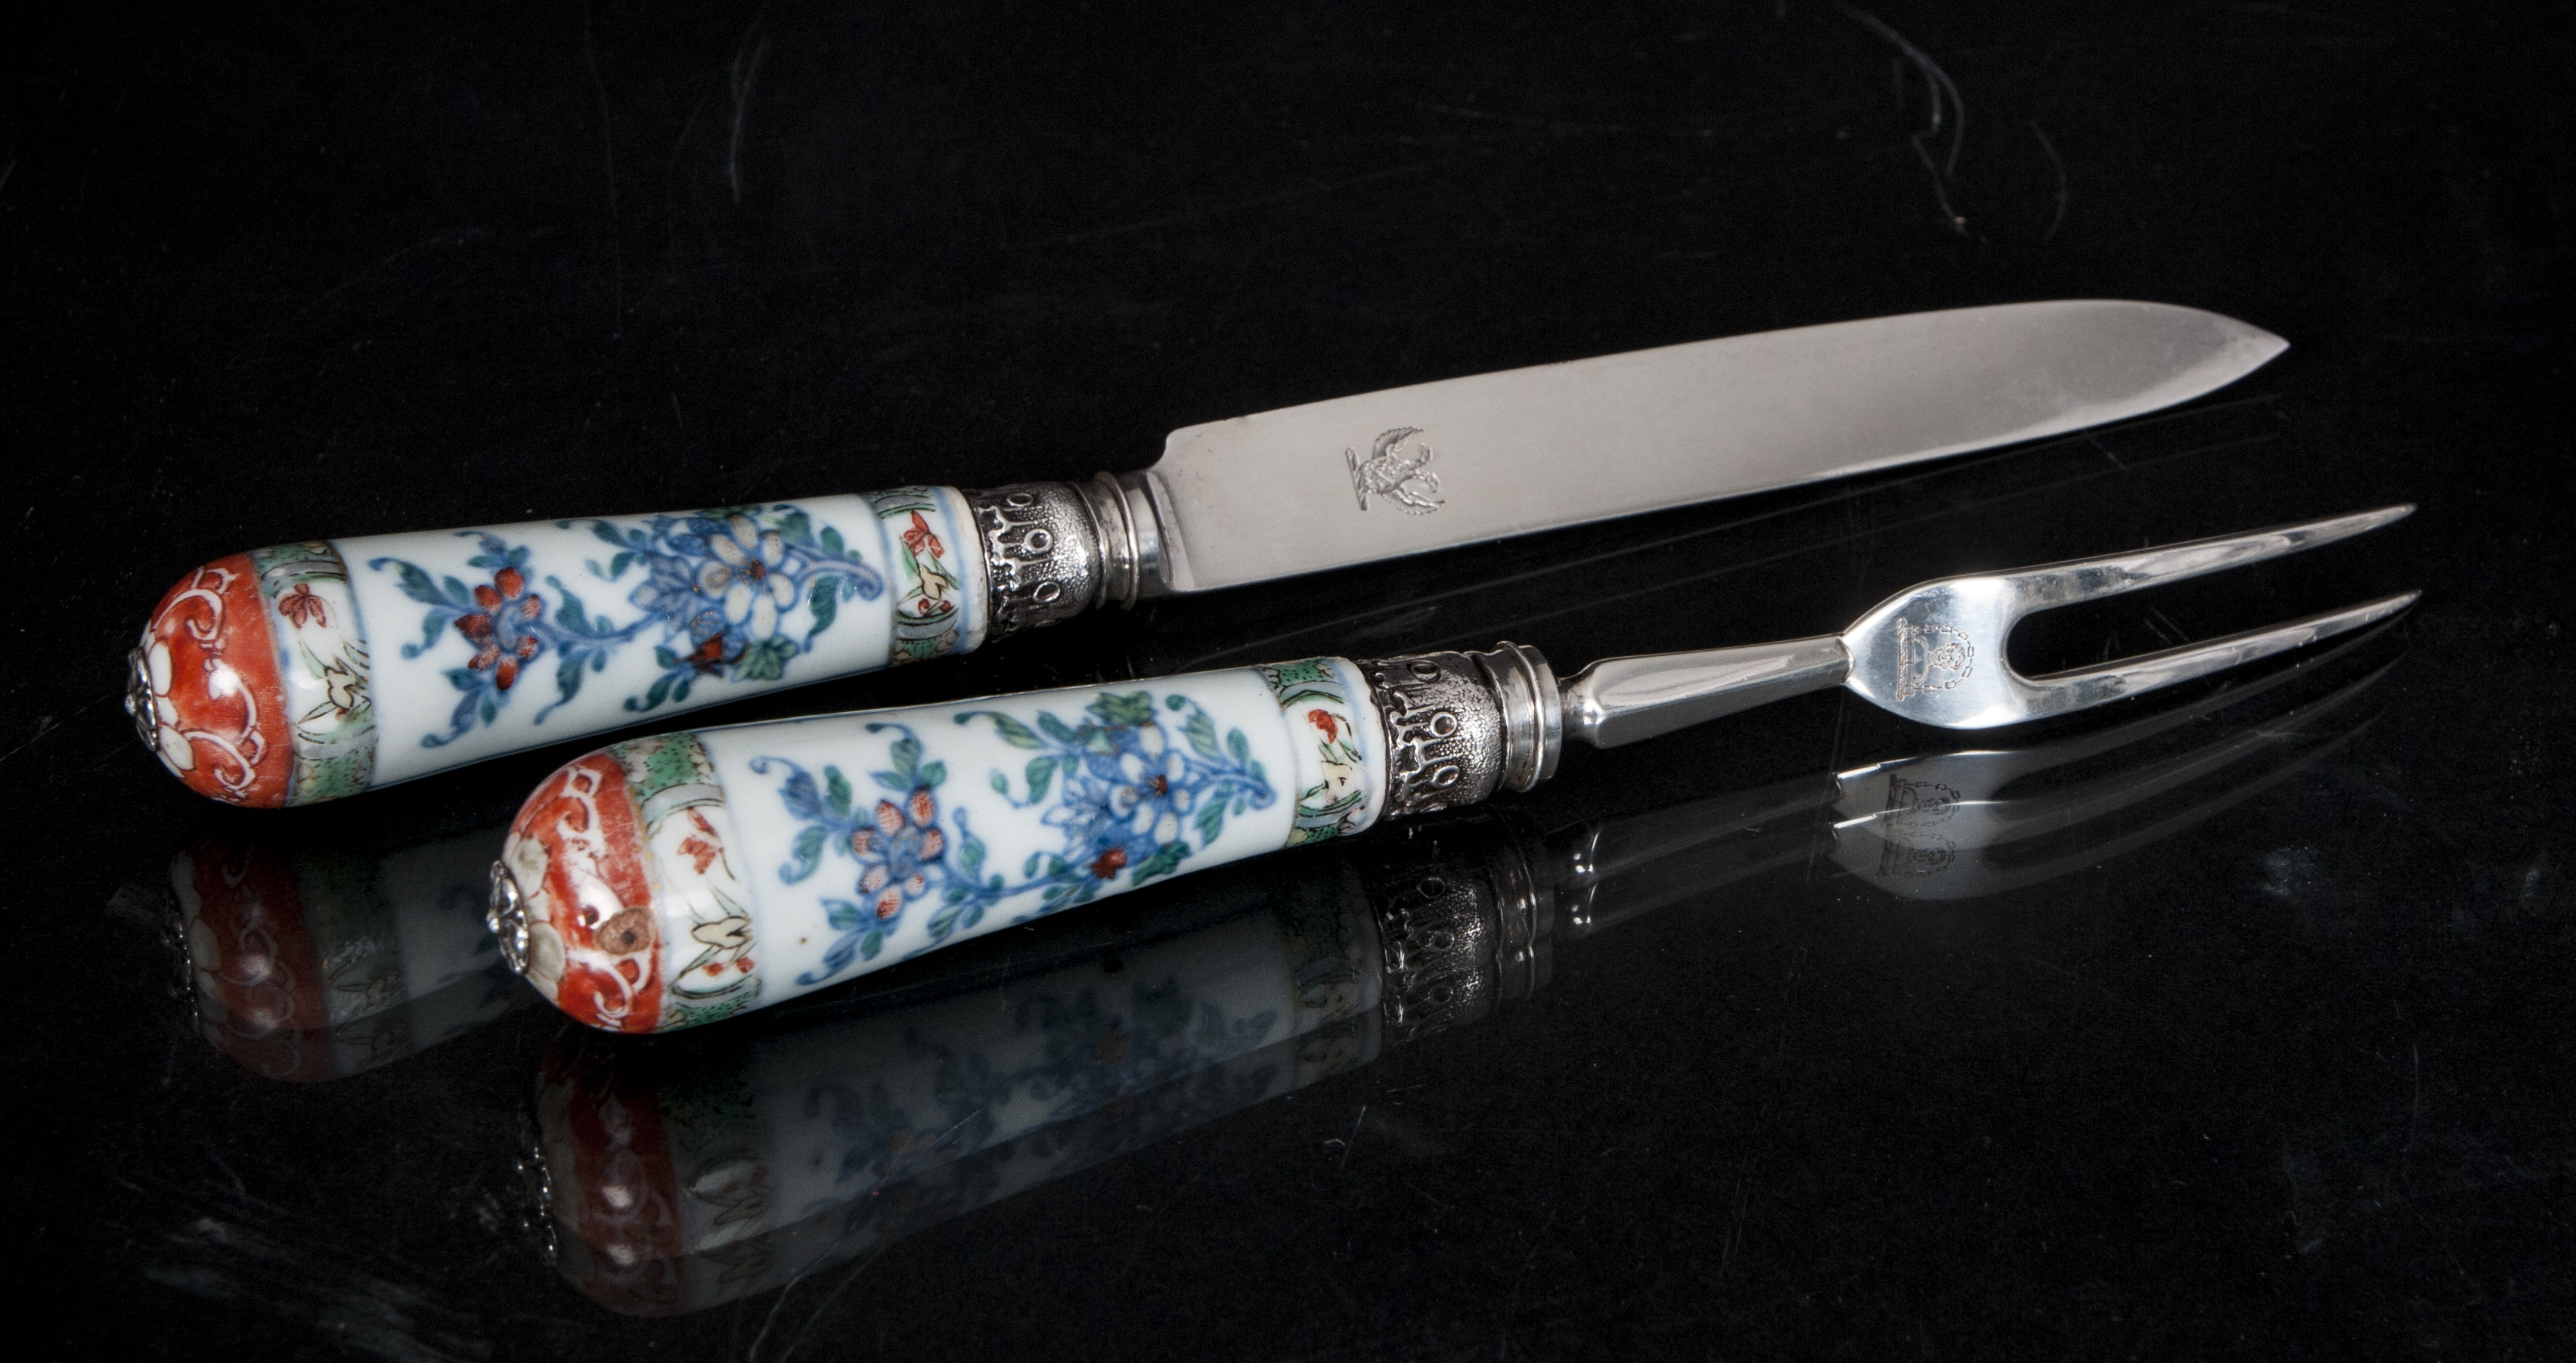 A pair of carvers with porcelain handles - image 2